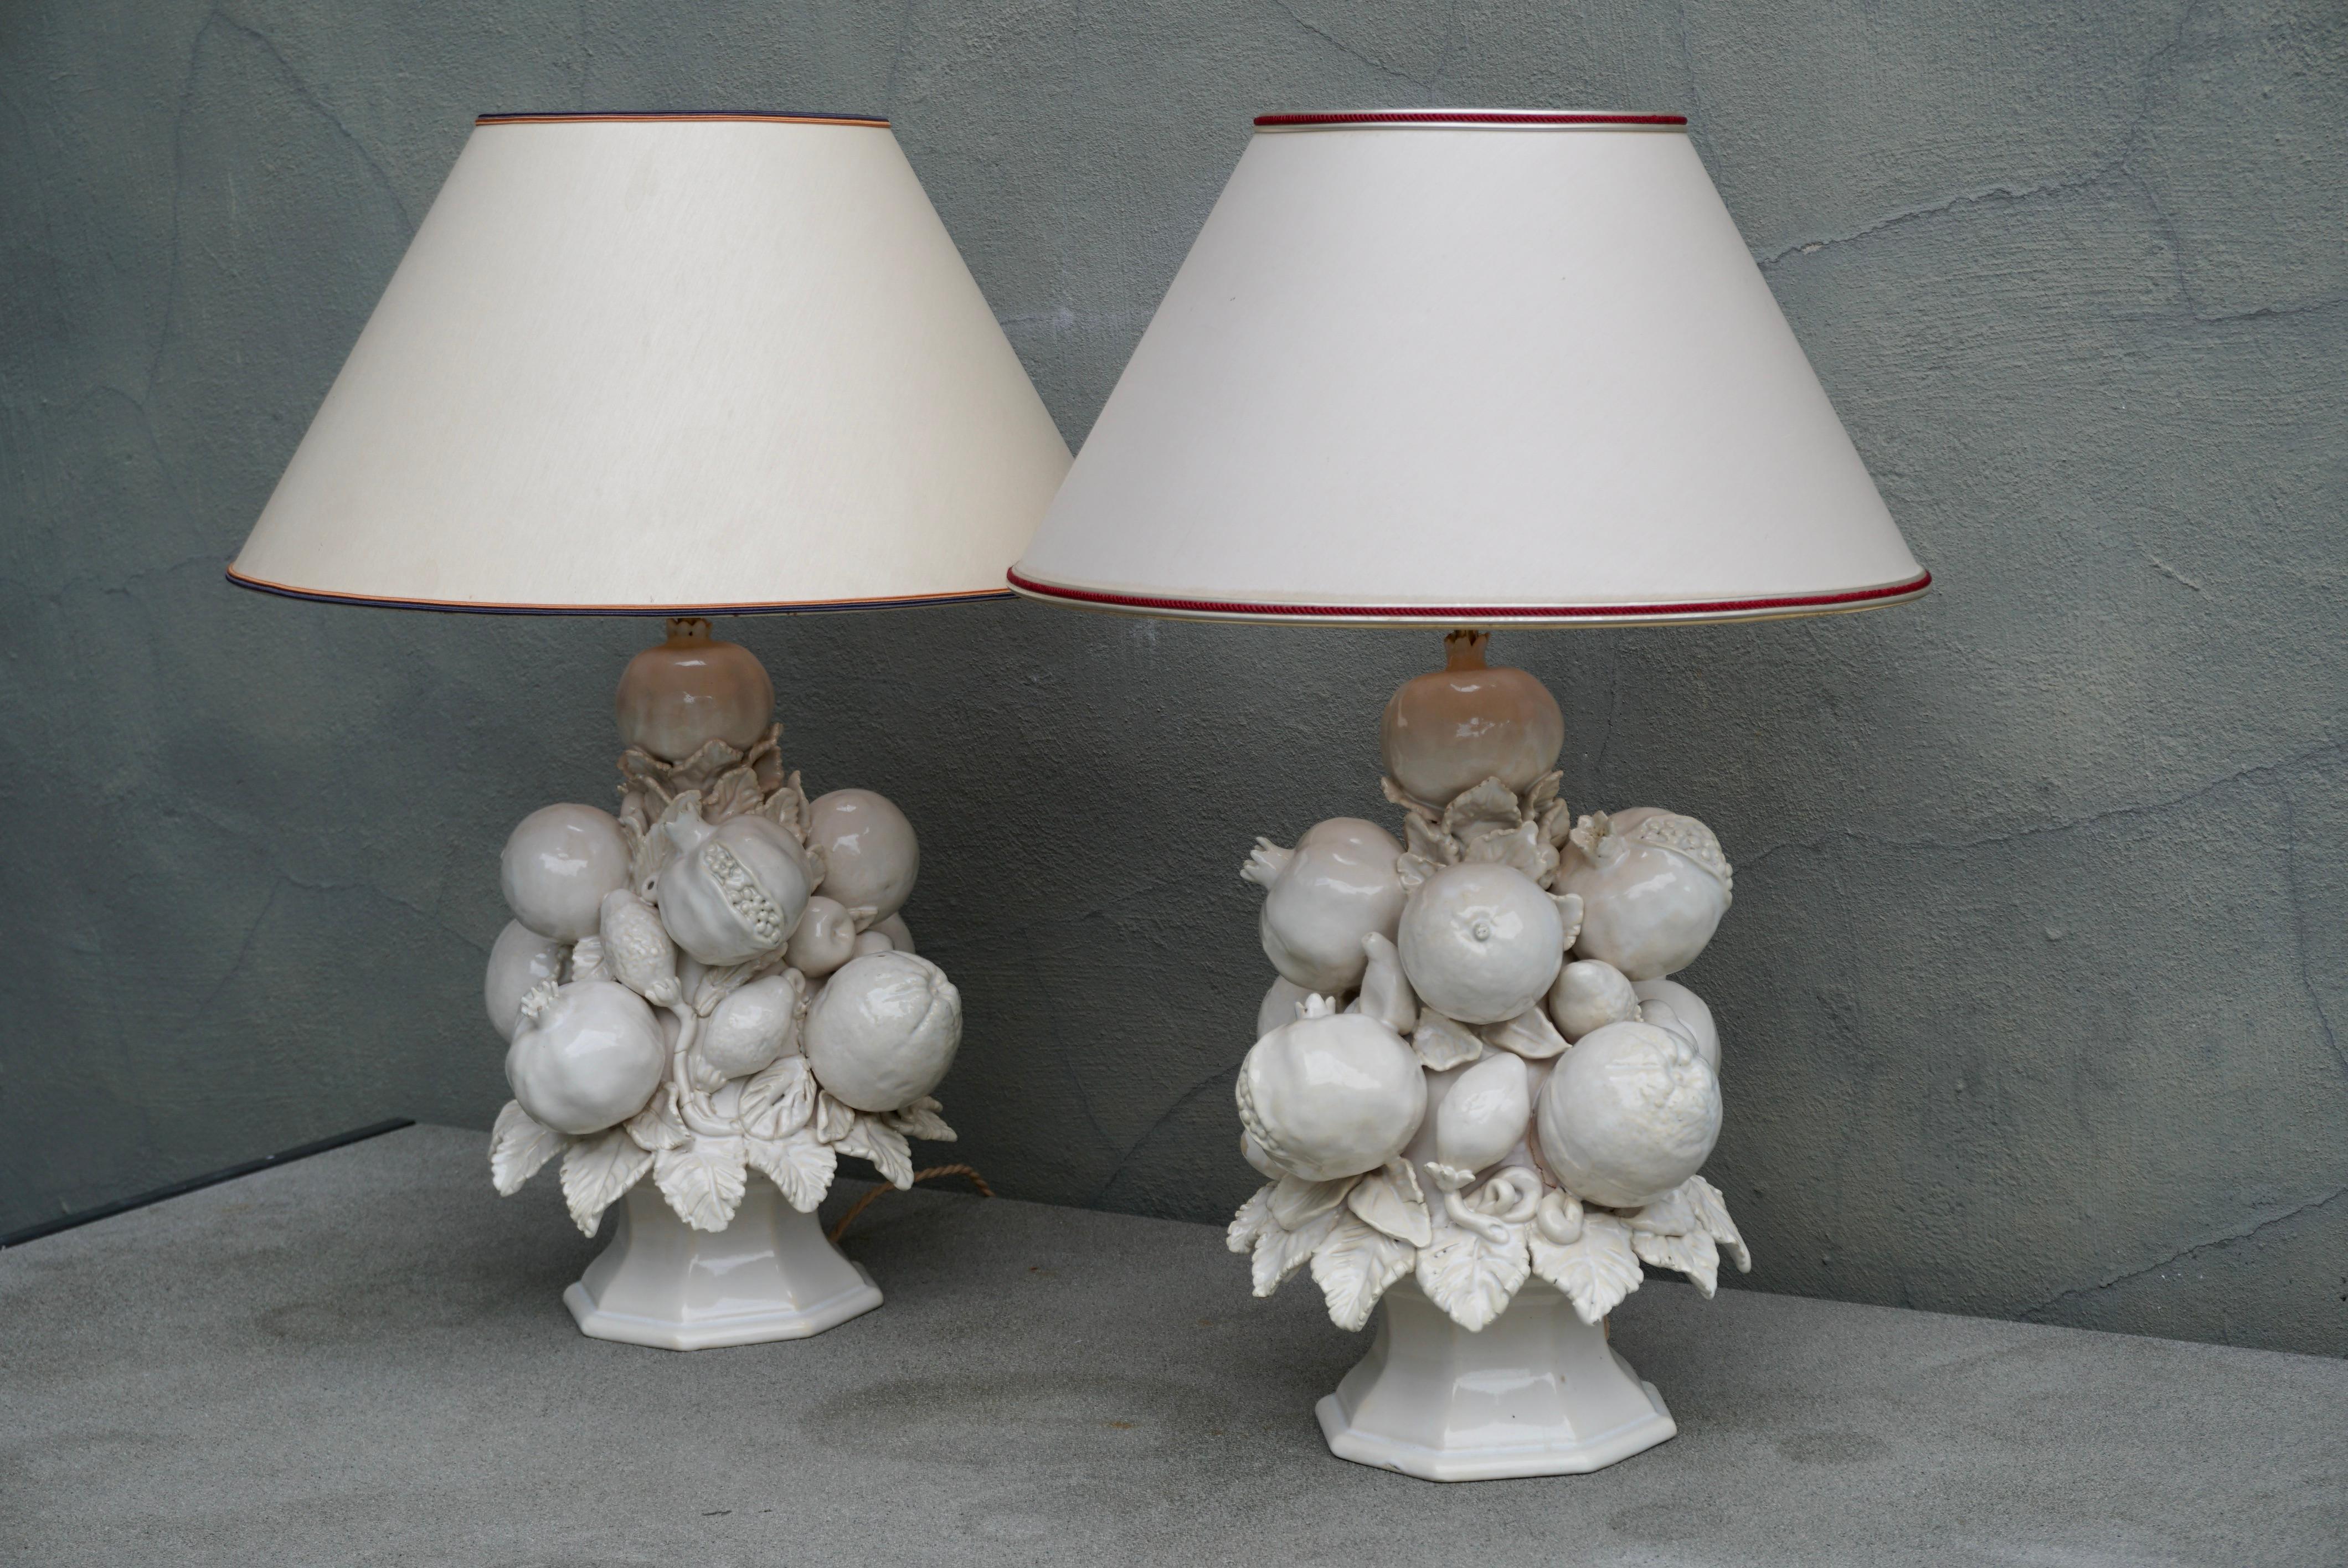 Two beautiful table lamps in white glazed ceramic from the 1950s made in Italy or Spain by Cerámica Bondia.
Handmade with fruit and leaves in a vase.

Diameter - 11.8